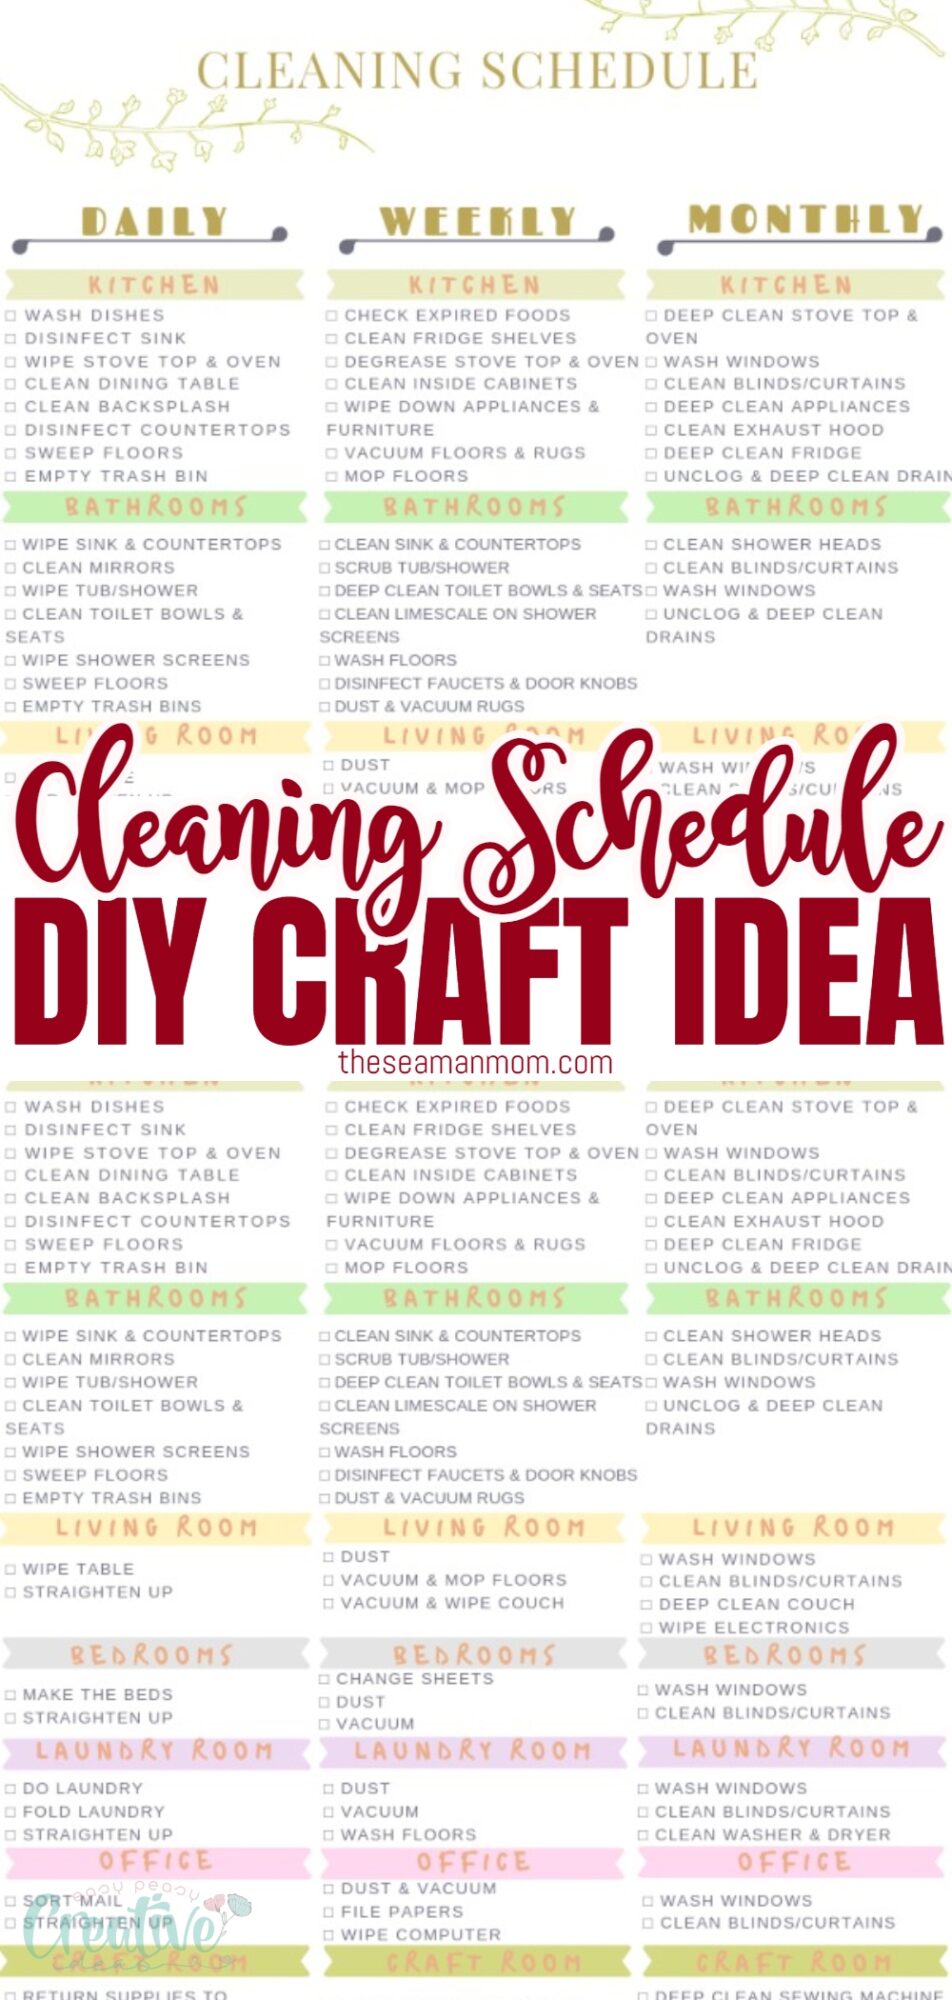 Printable cleaning schedule with daily, weekly and monthly chores